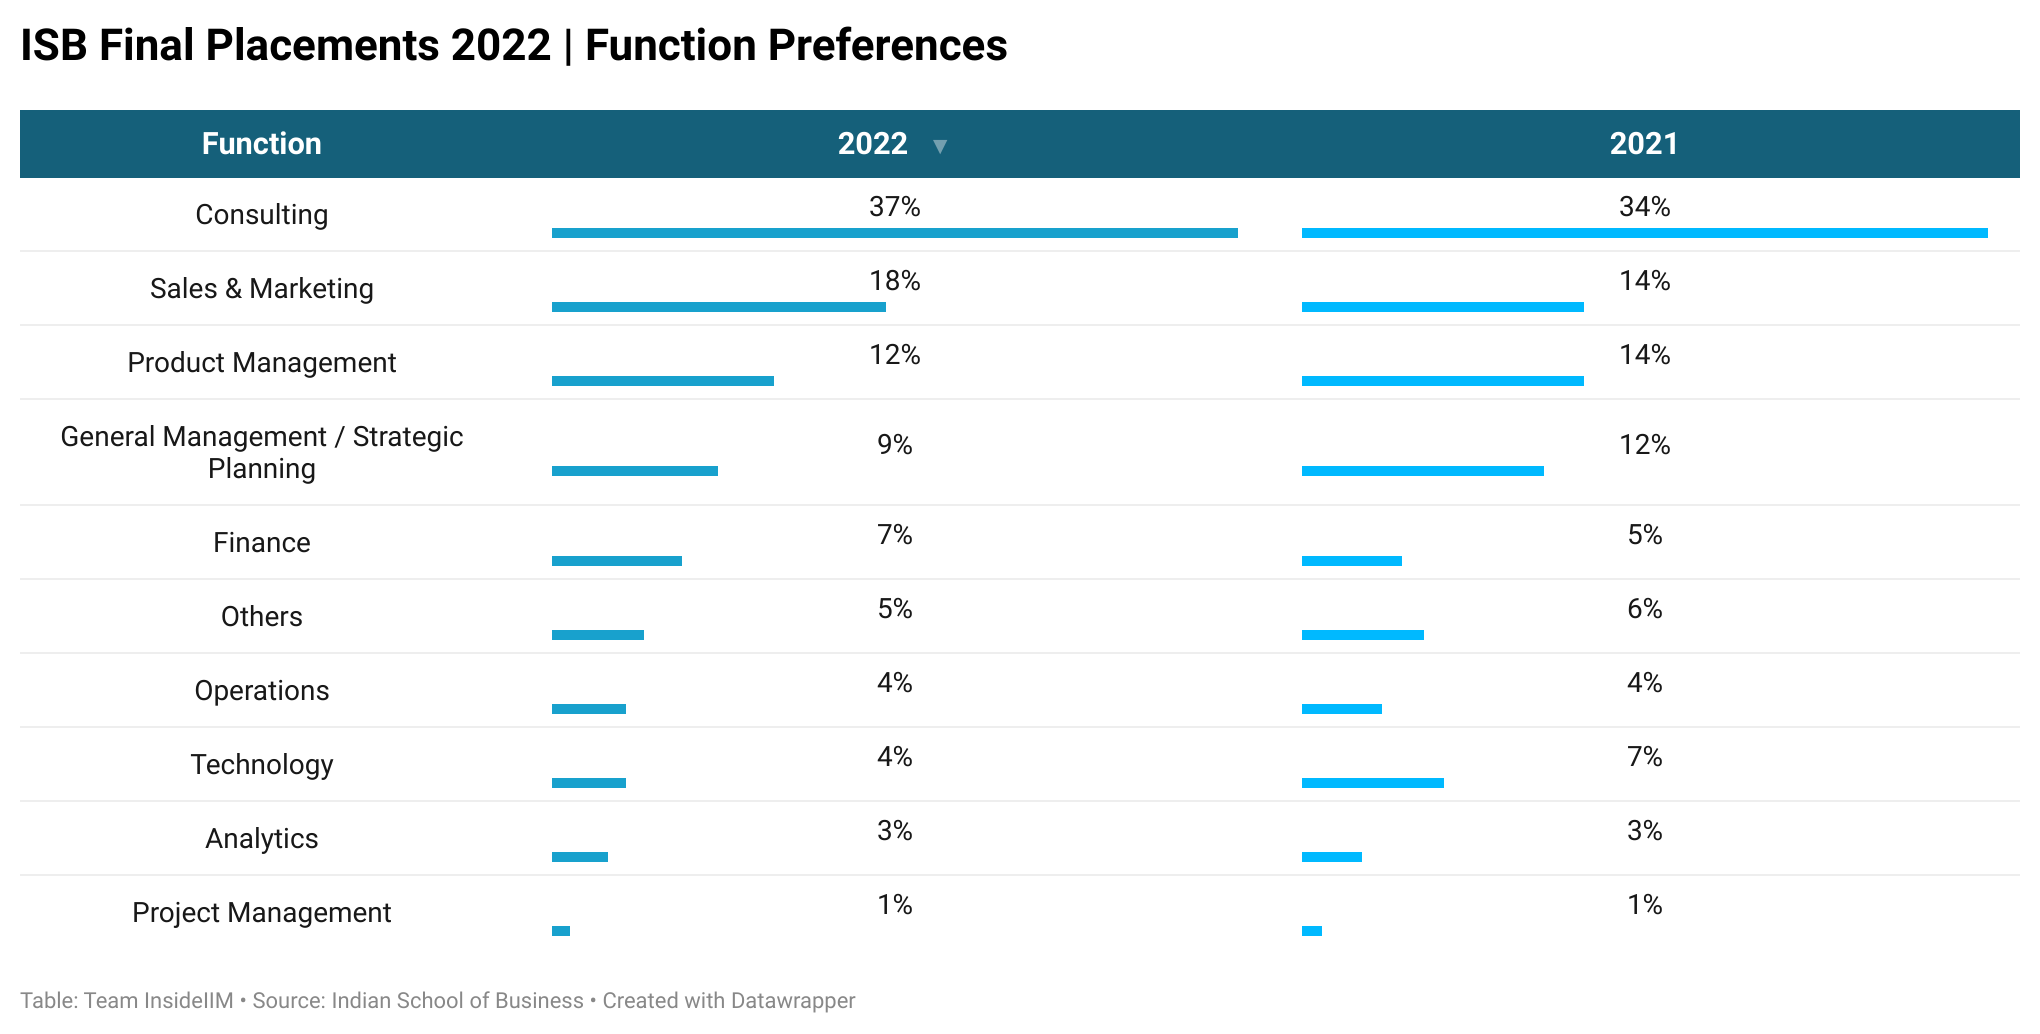 ISB Placements 2022 - Function Preferences